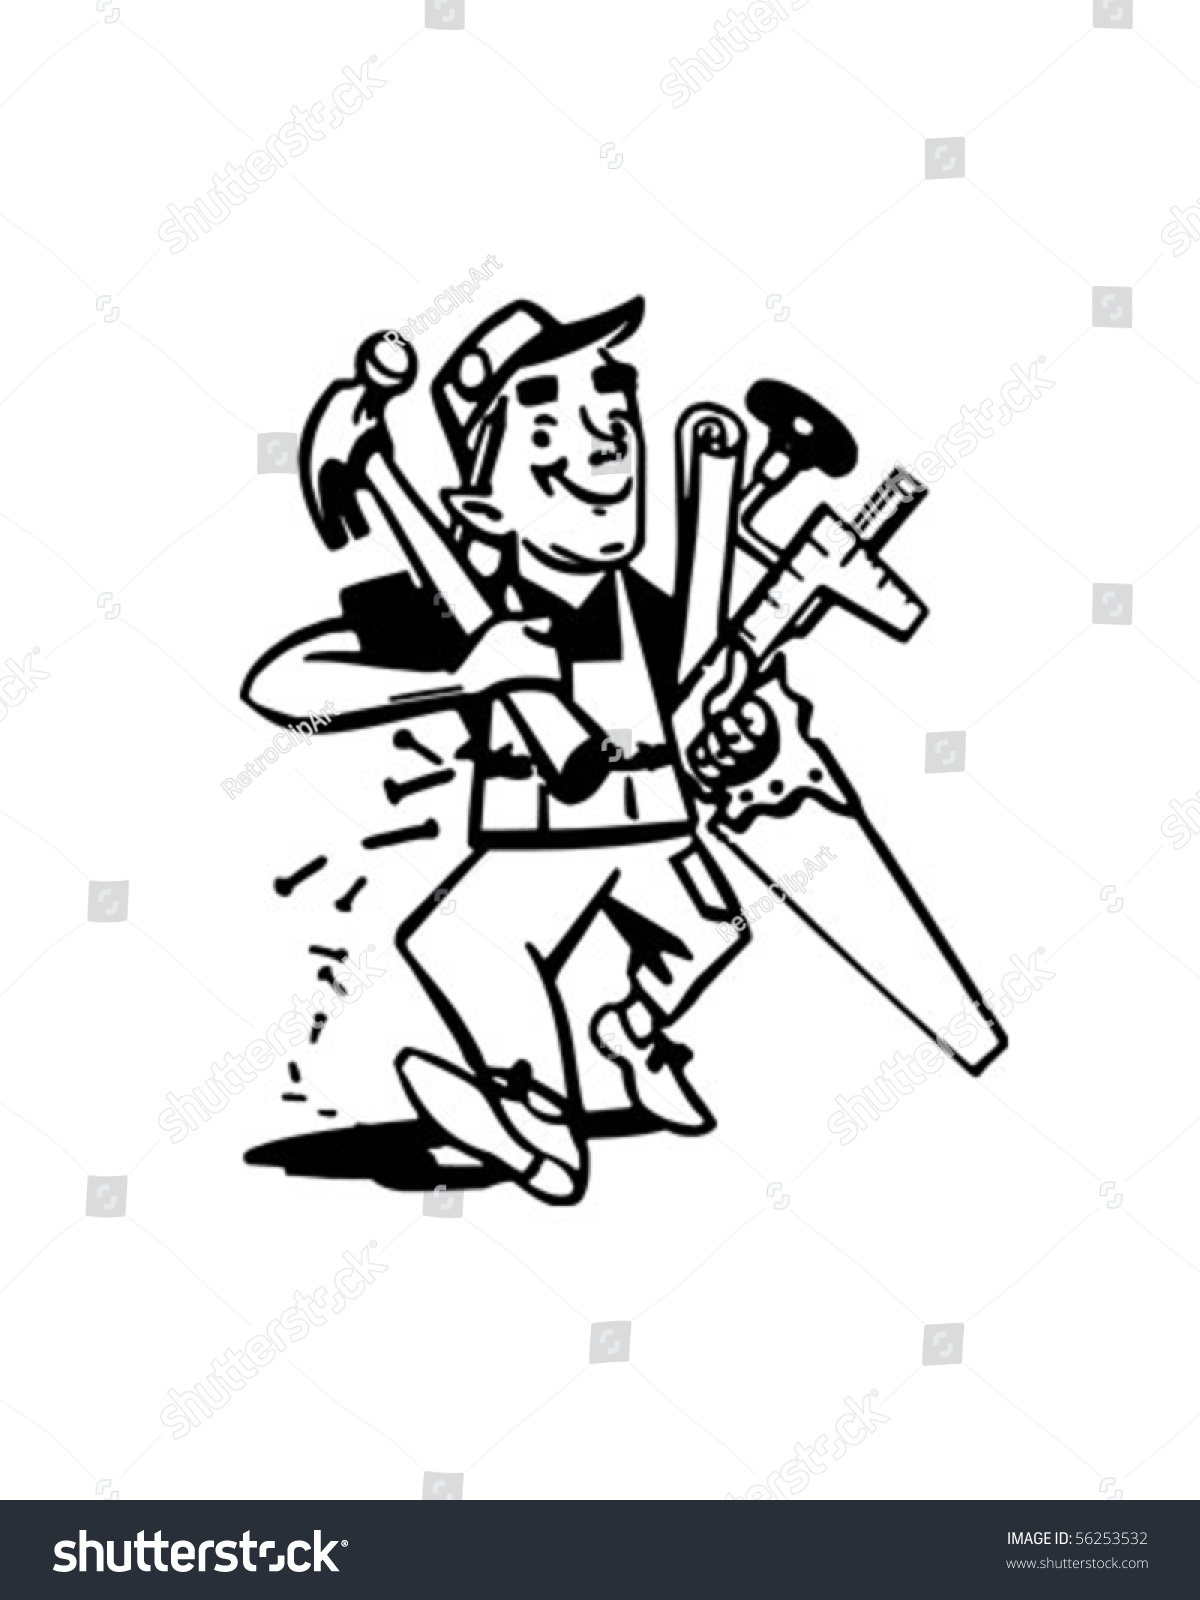 clipart handyman with tools - photo #45